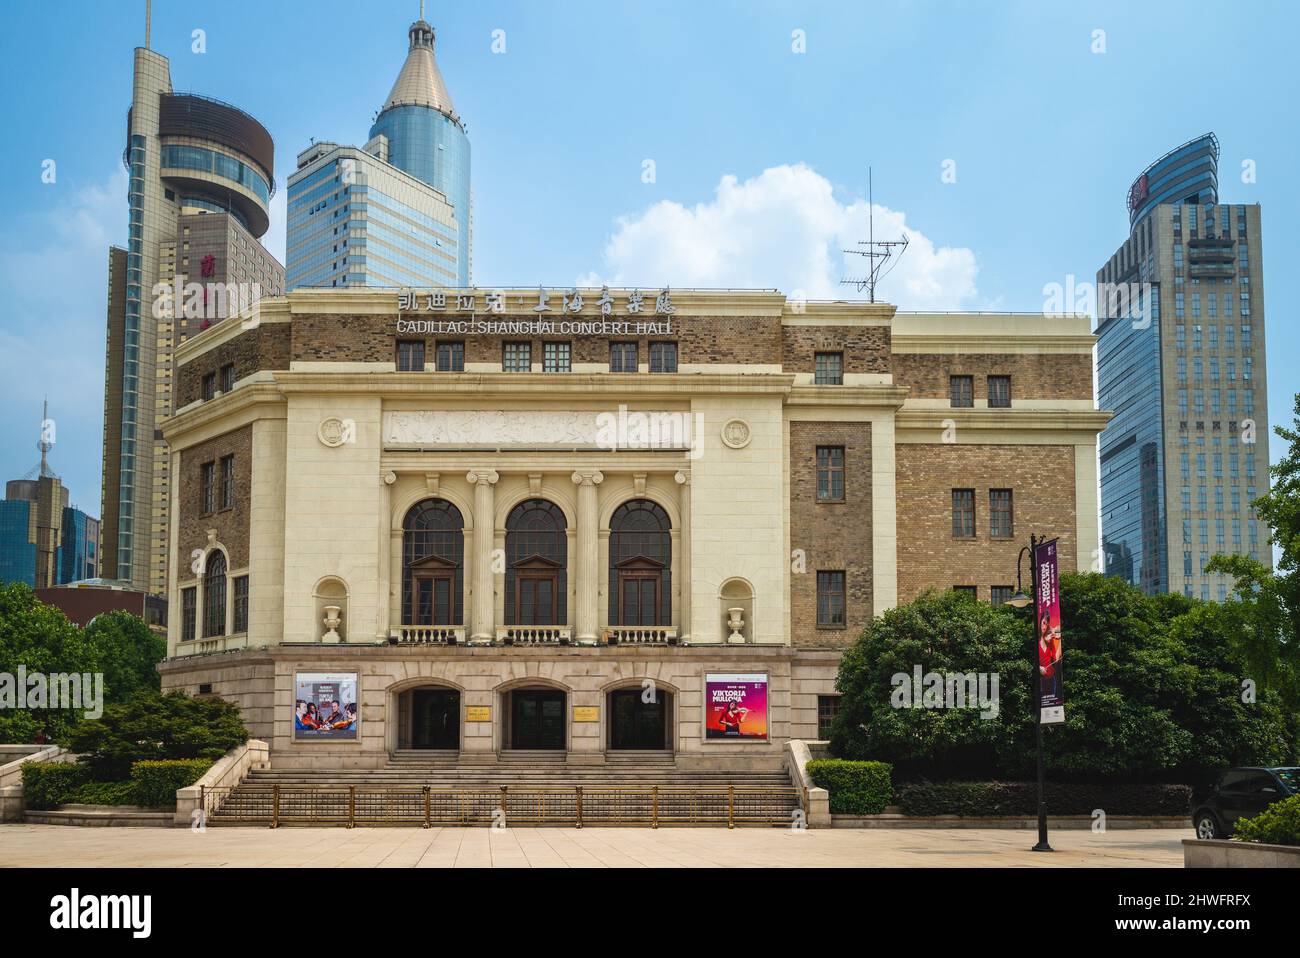 July 27, 2018: Cadillac shanghai concert hall located at Huangpu District, Shanghai, China, founded in 1930 as Nanjing Drama Hall, renamed Beijing to Stock Photo